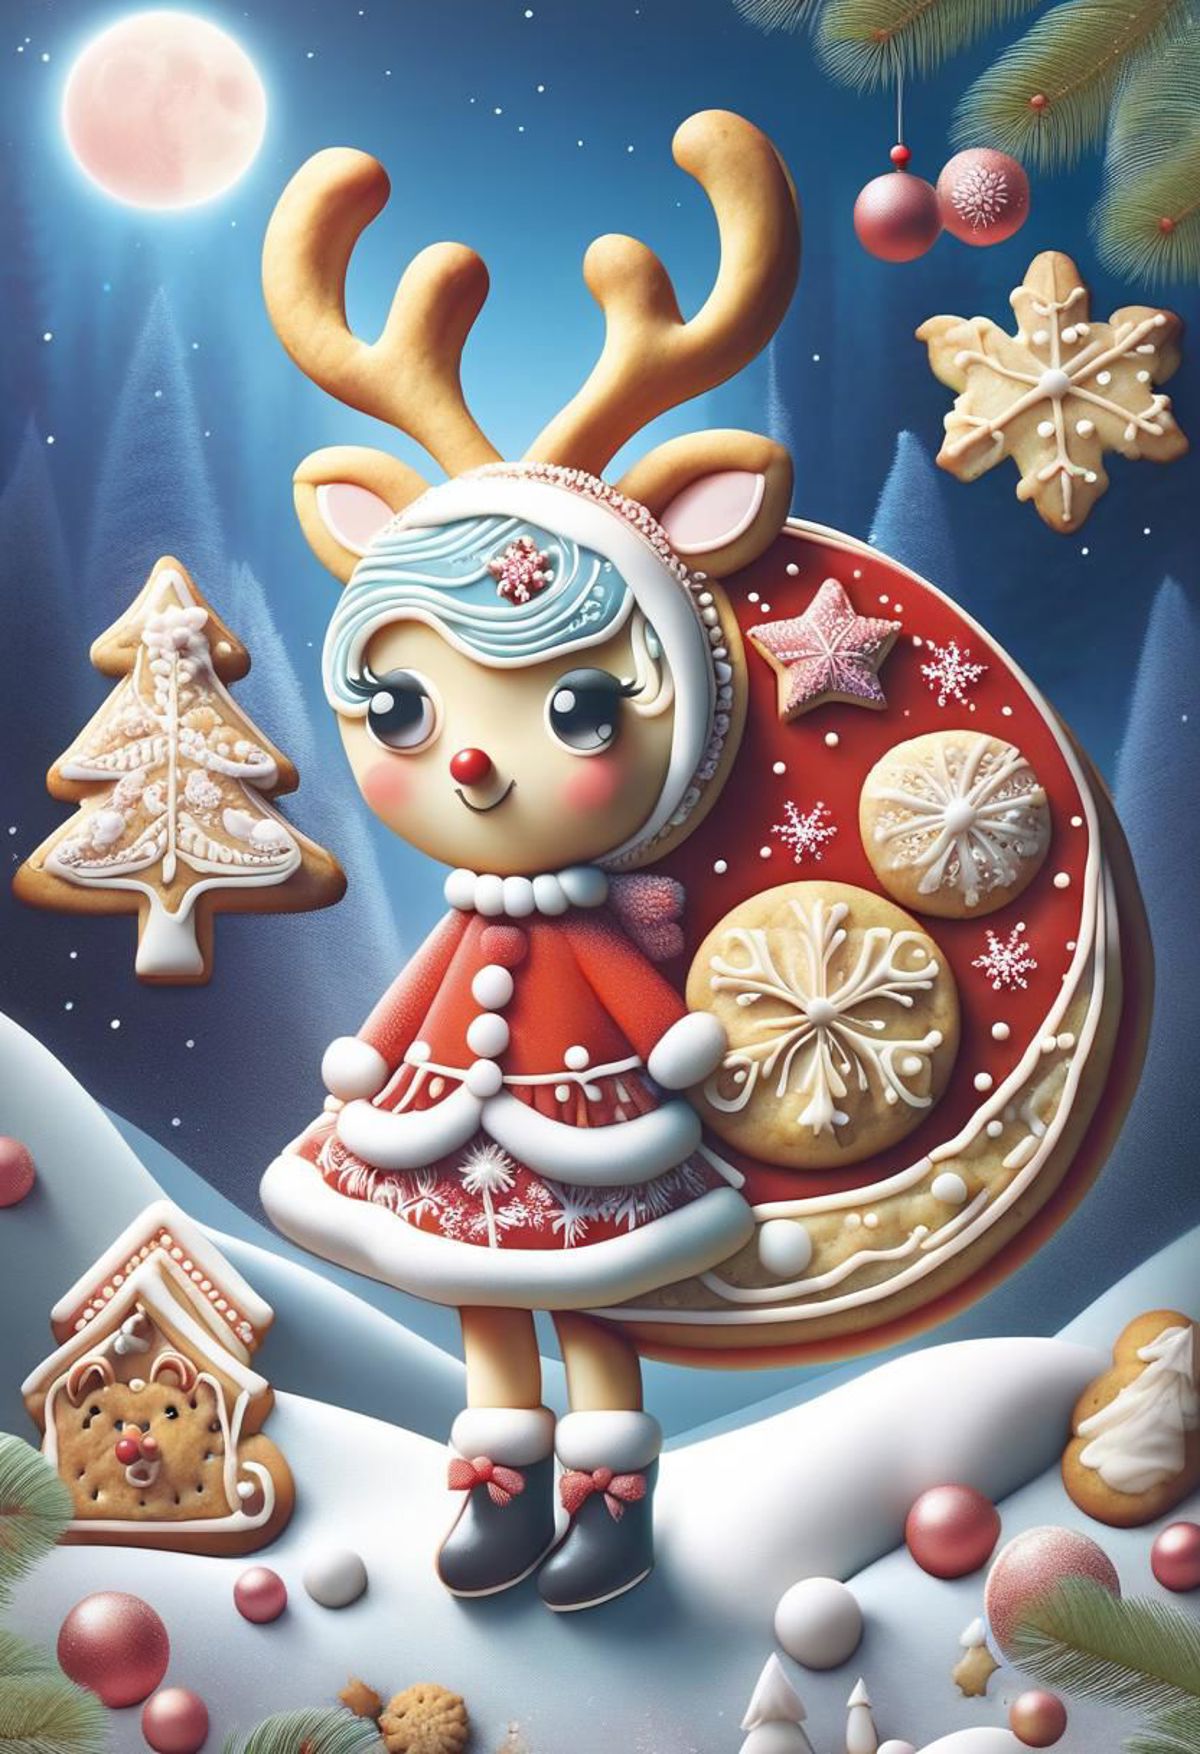 🍪SDXL Xmas Cookie🍪 image by Anonimous1234567890